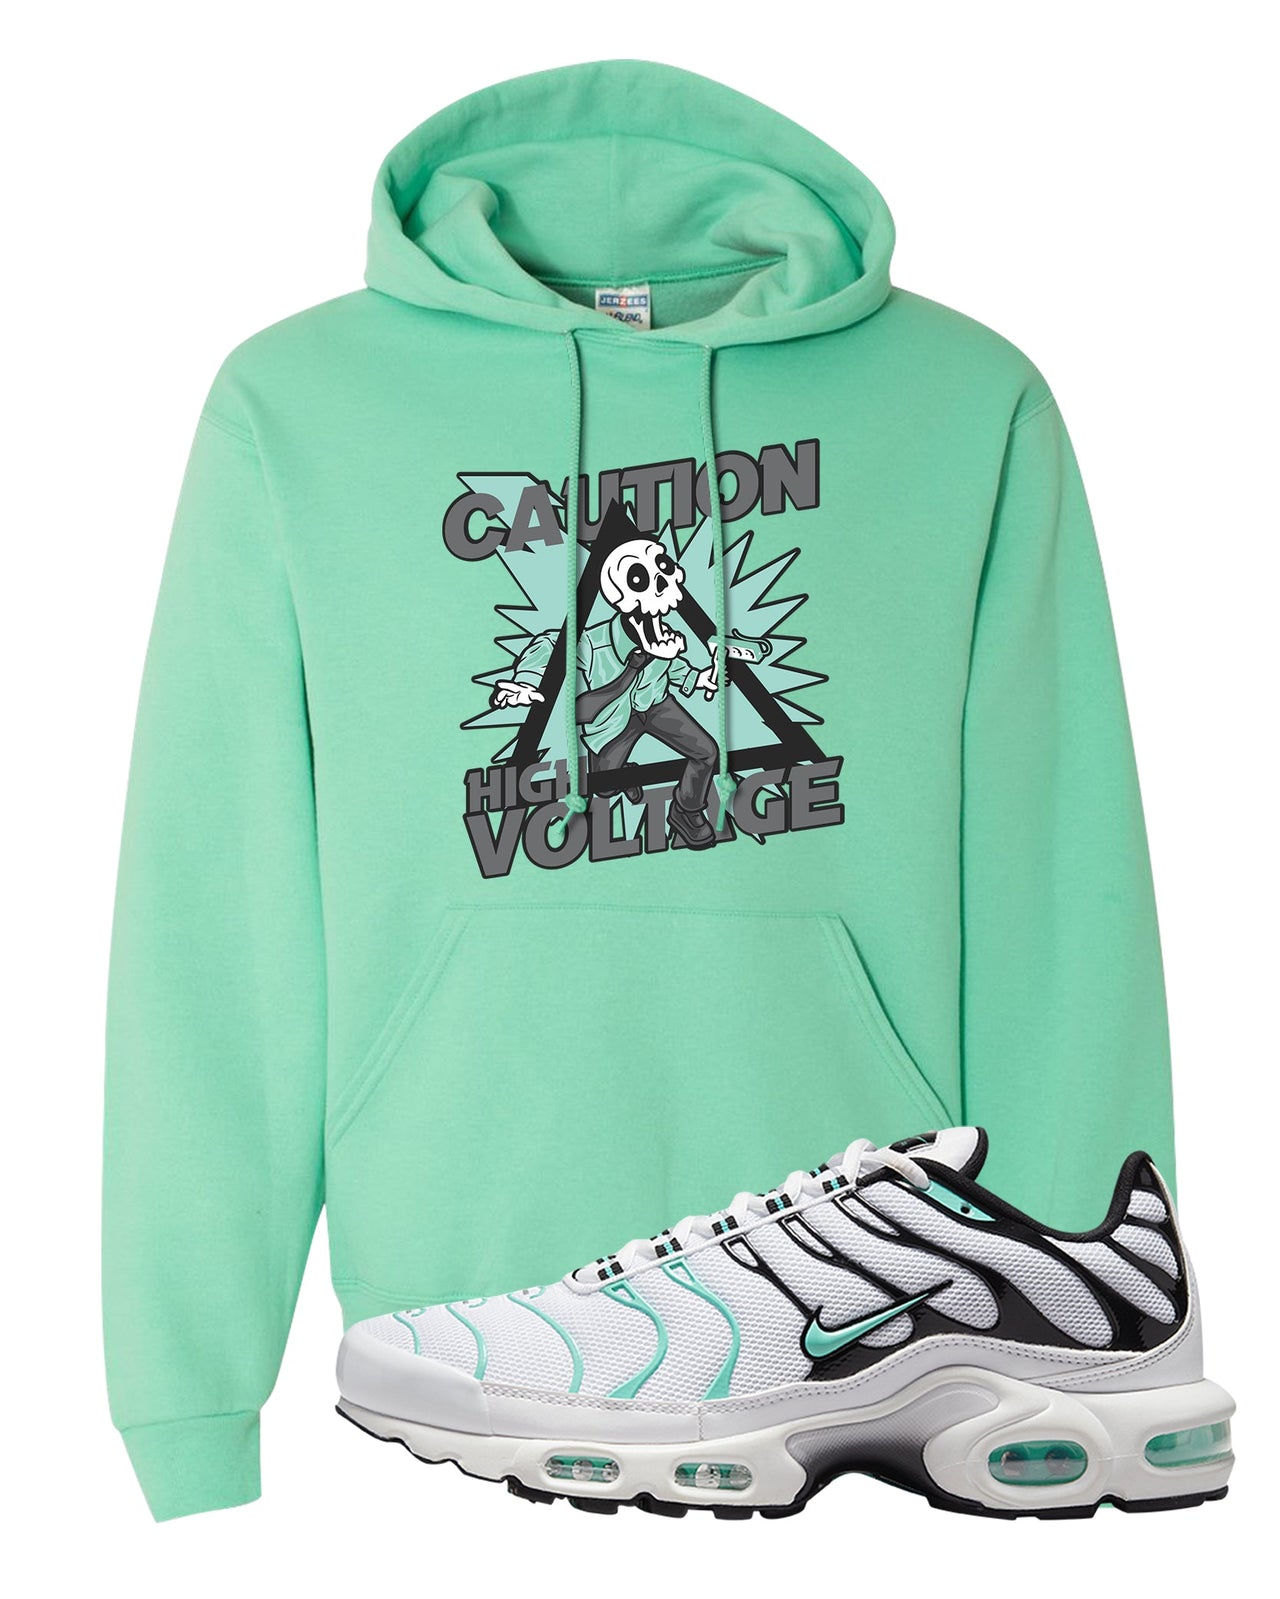 Hyper Jade Pluses Hoodie | Caution High Voltage, Cool Mint